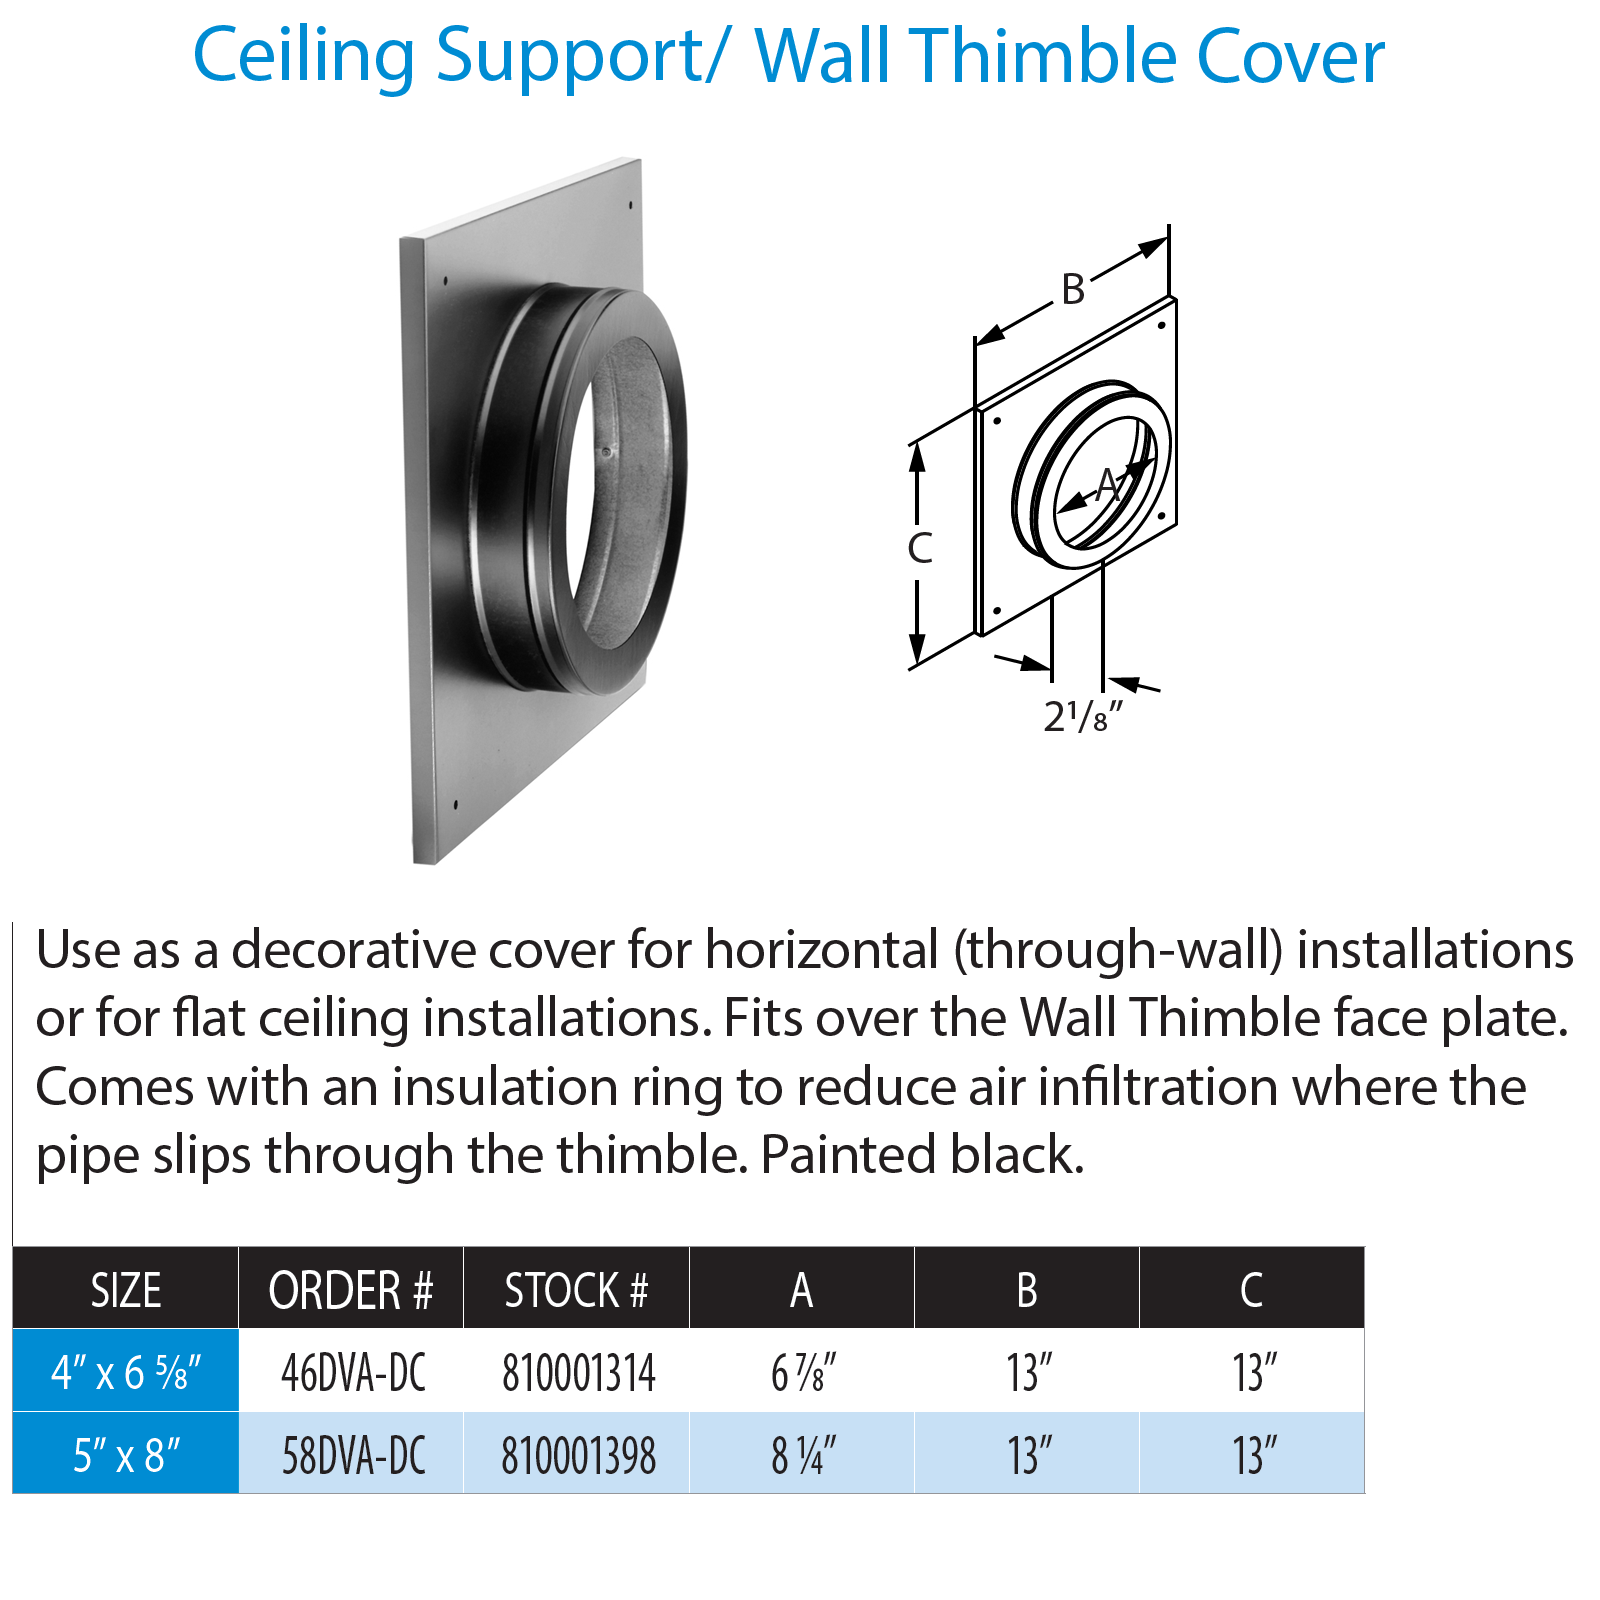 DuraVent DVP Ceiling Support/Wall Thimble Cover | 58DVA-DC